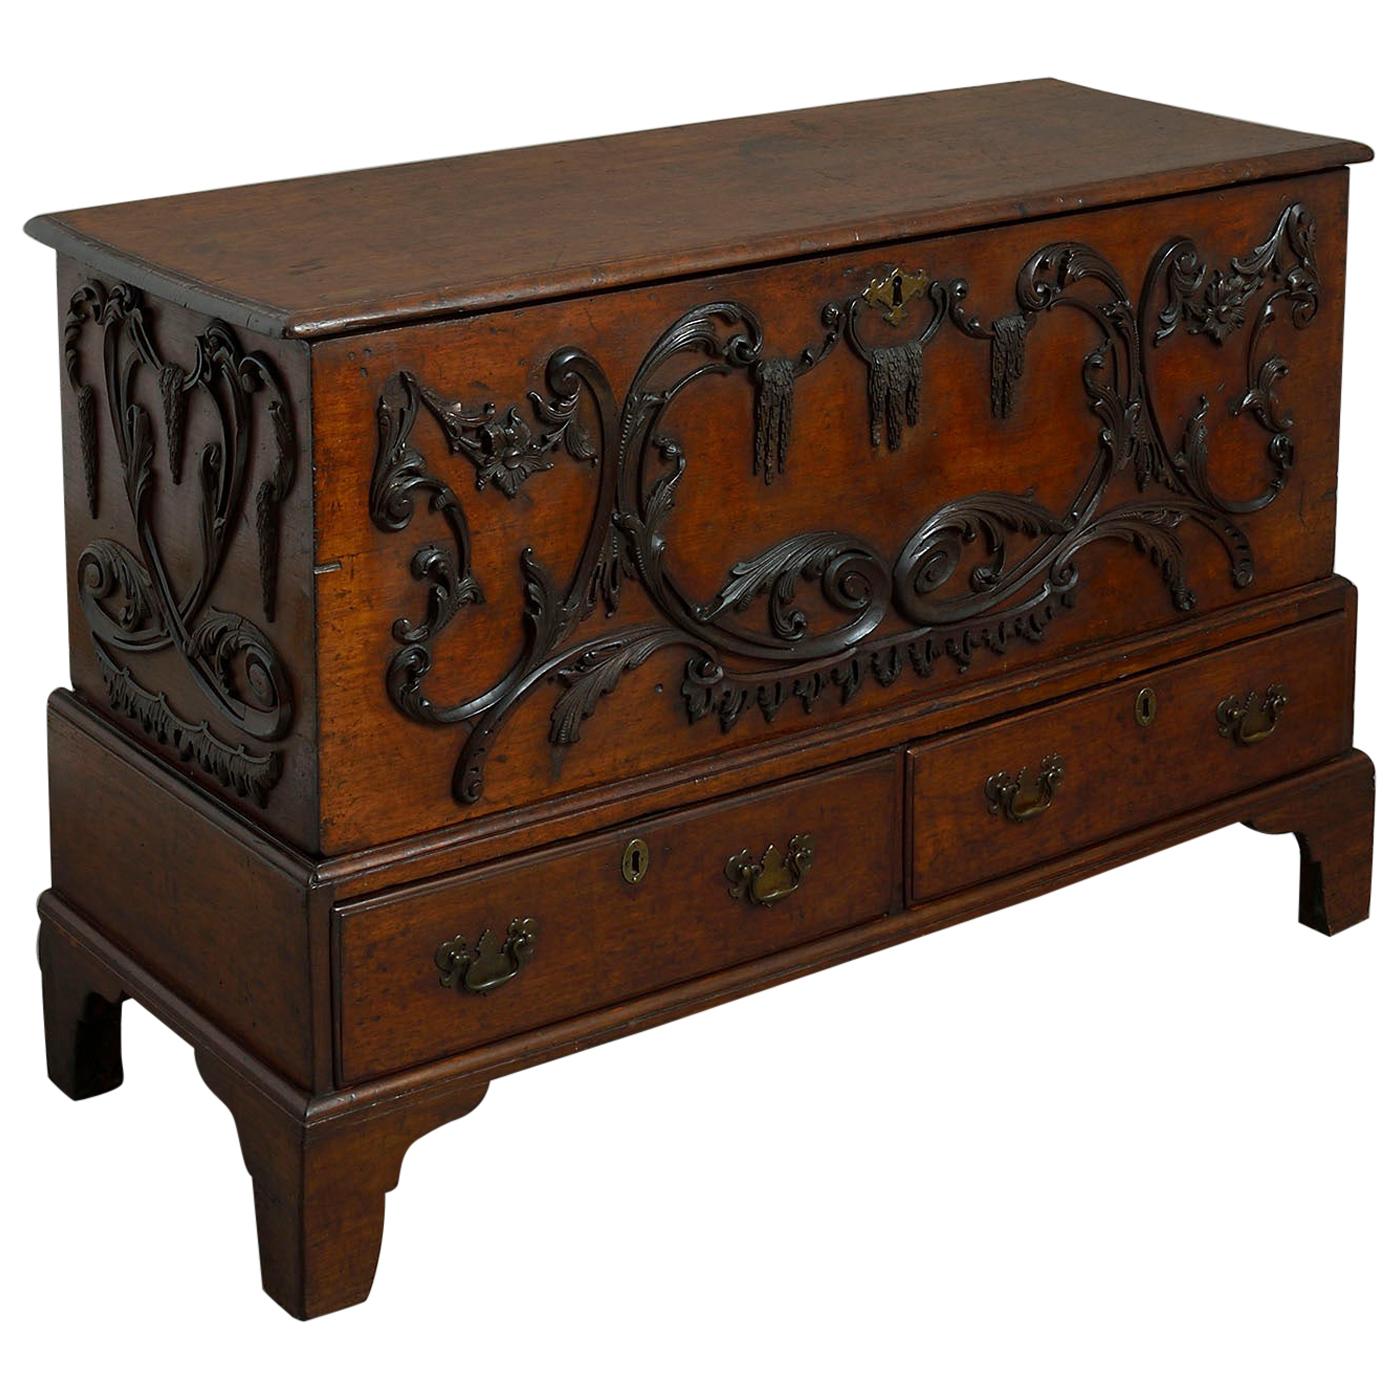 Mid-18th Century George III Mahogany Mule Chest or Blanket Chest